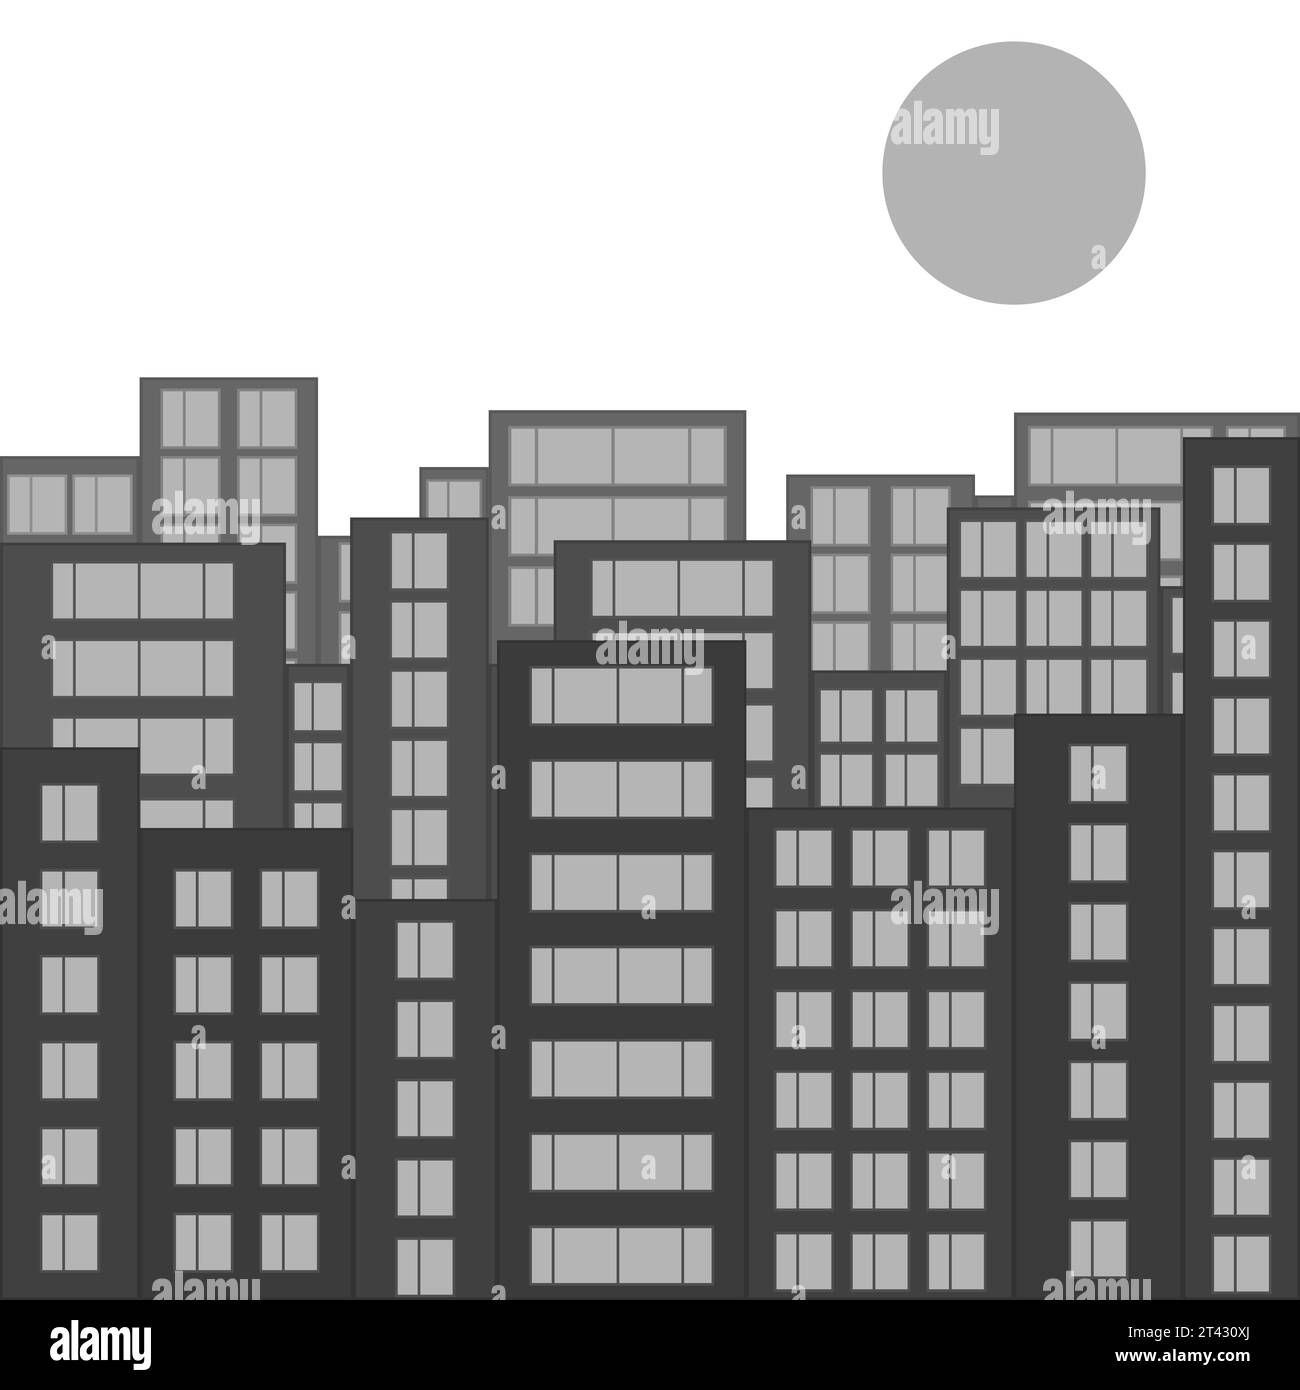 Modern city skyline. Gray cityscape with silhouettes of houses and windows. Morning or daytime with the sun on the horizon. Vector illustration. Stock Vector